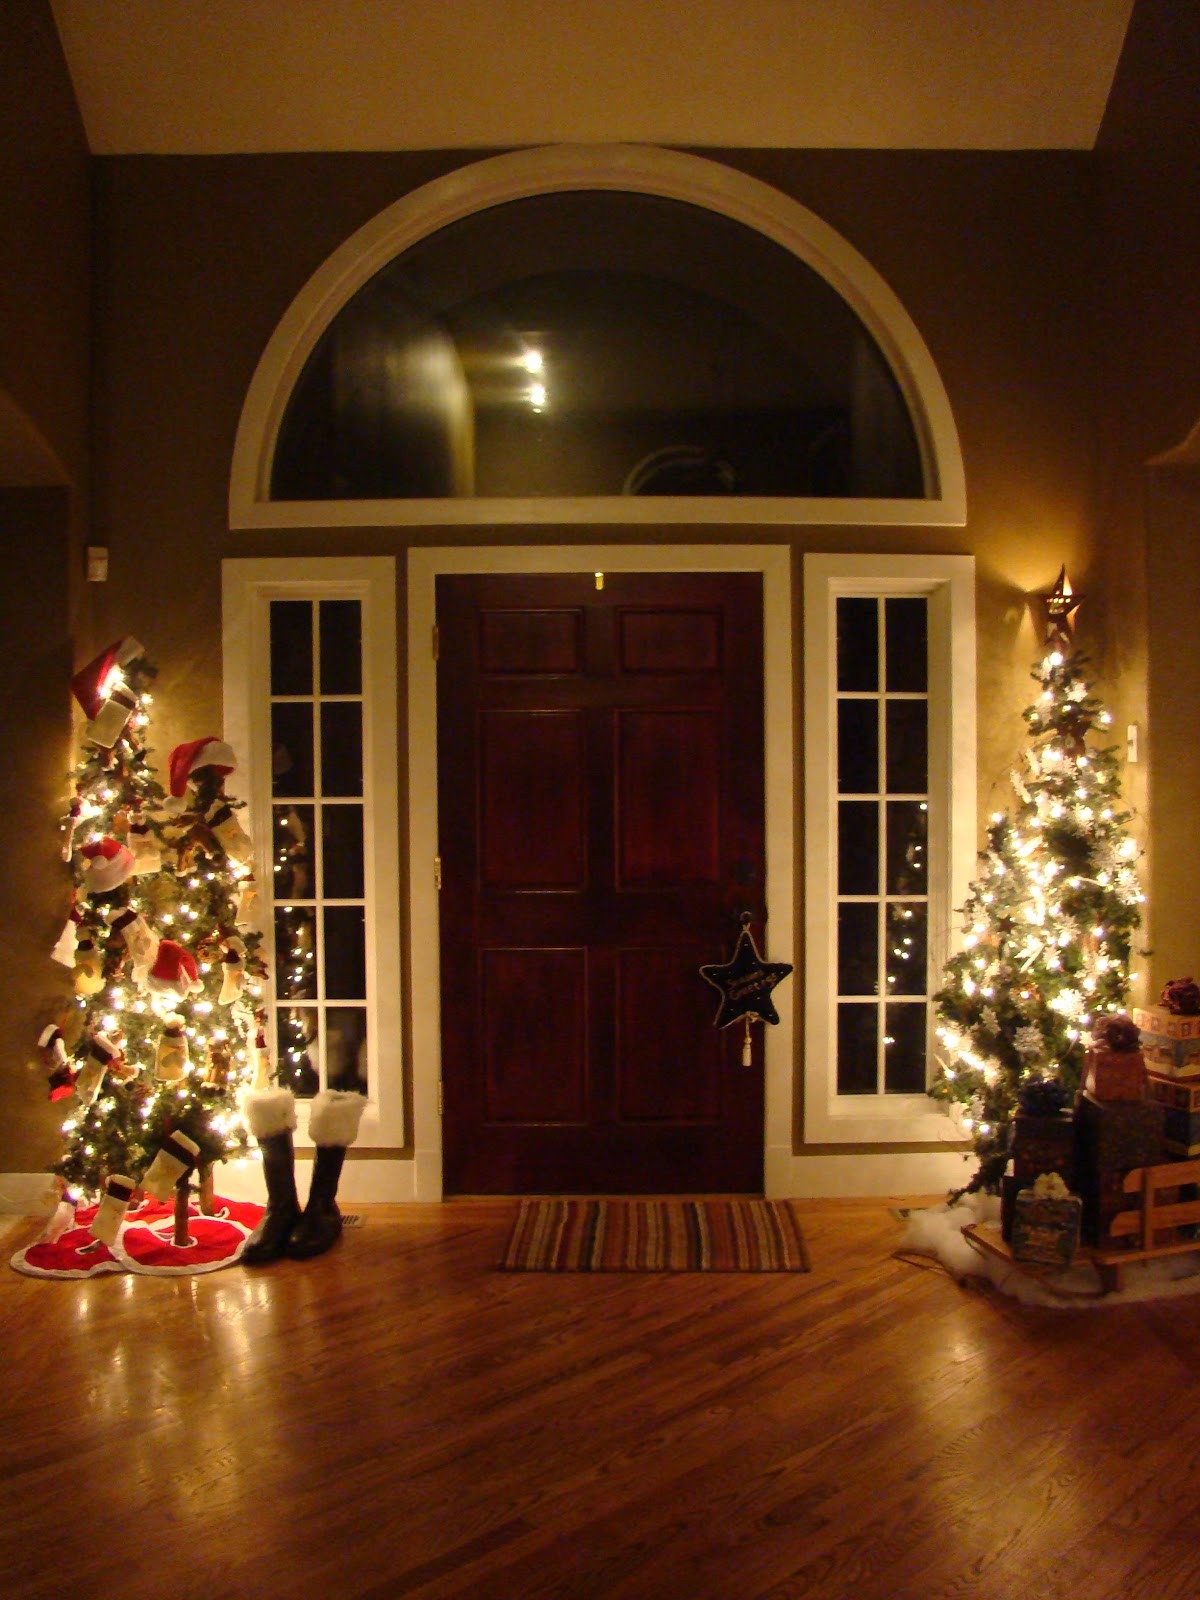 Christmas Entryway Decorating Ideas
 Entryways Decorated For Christmas